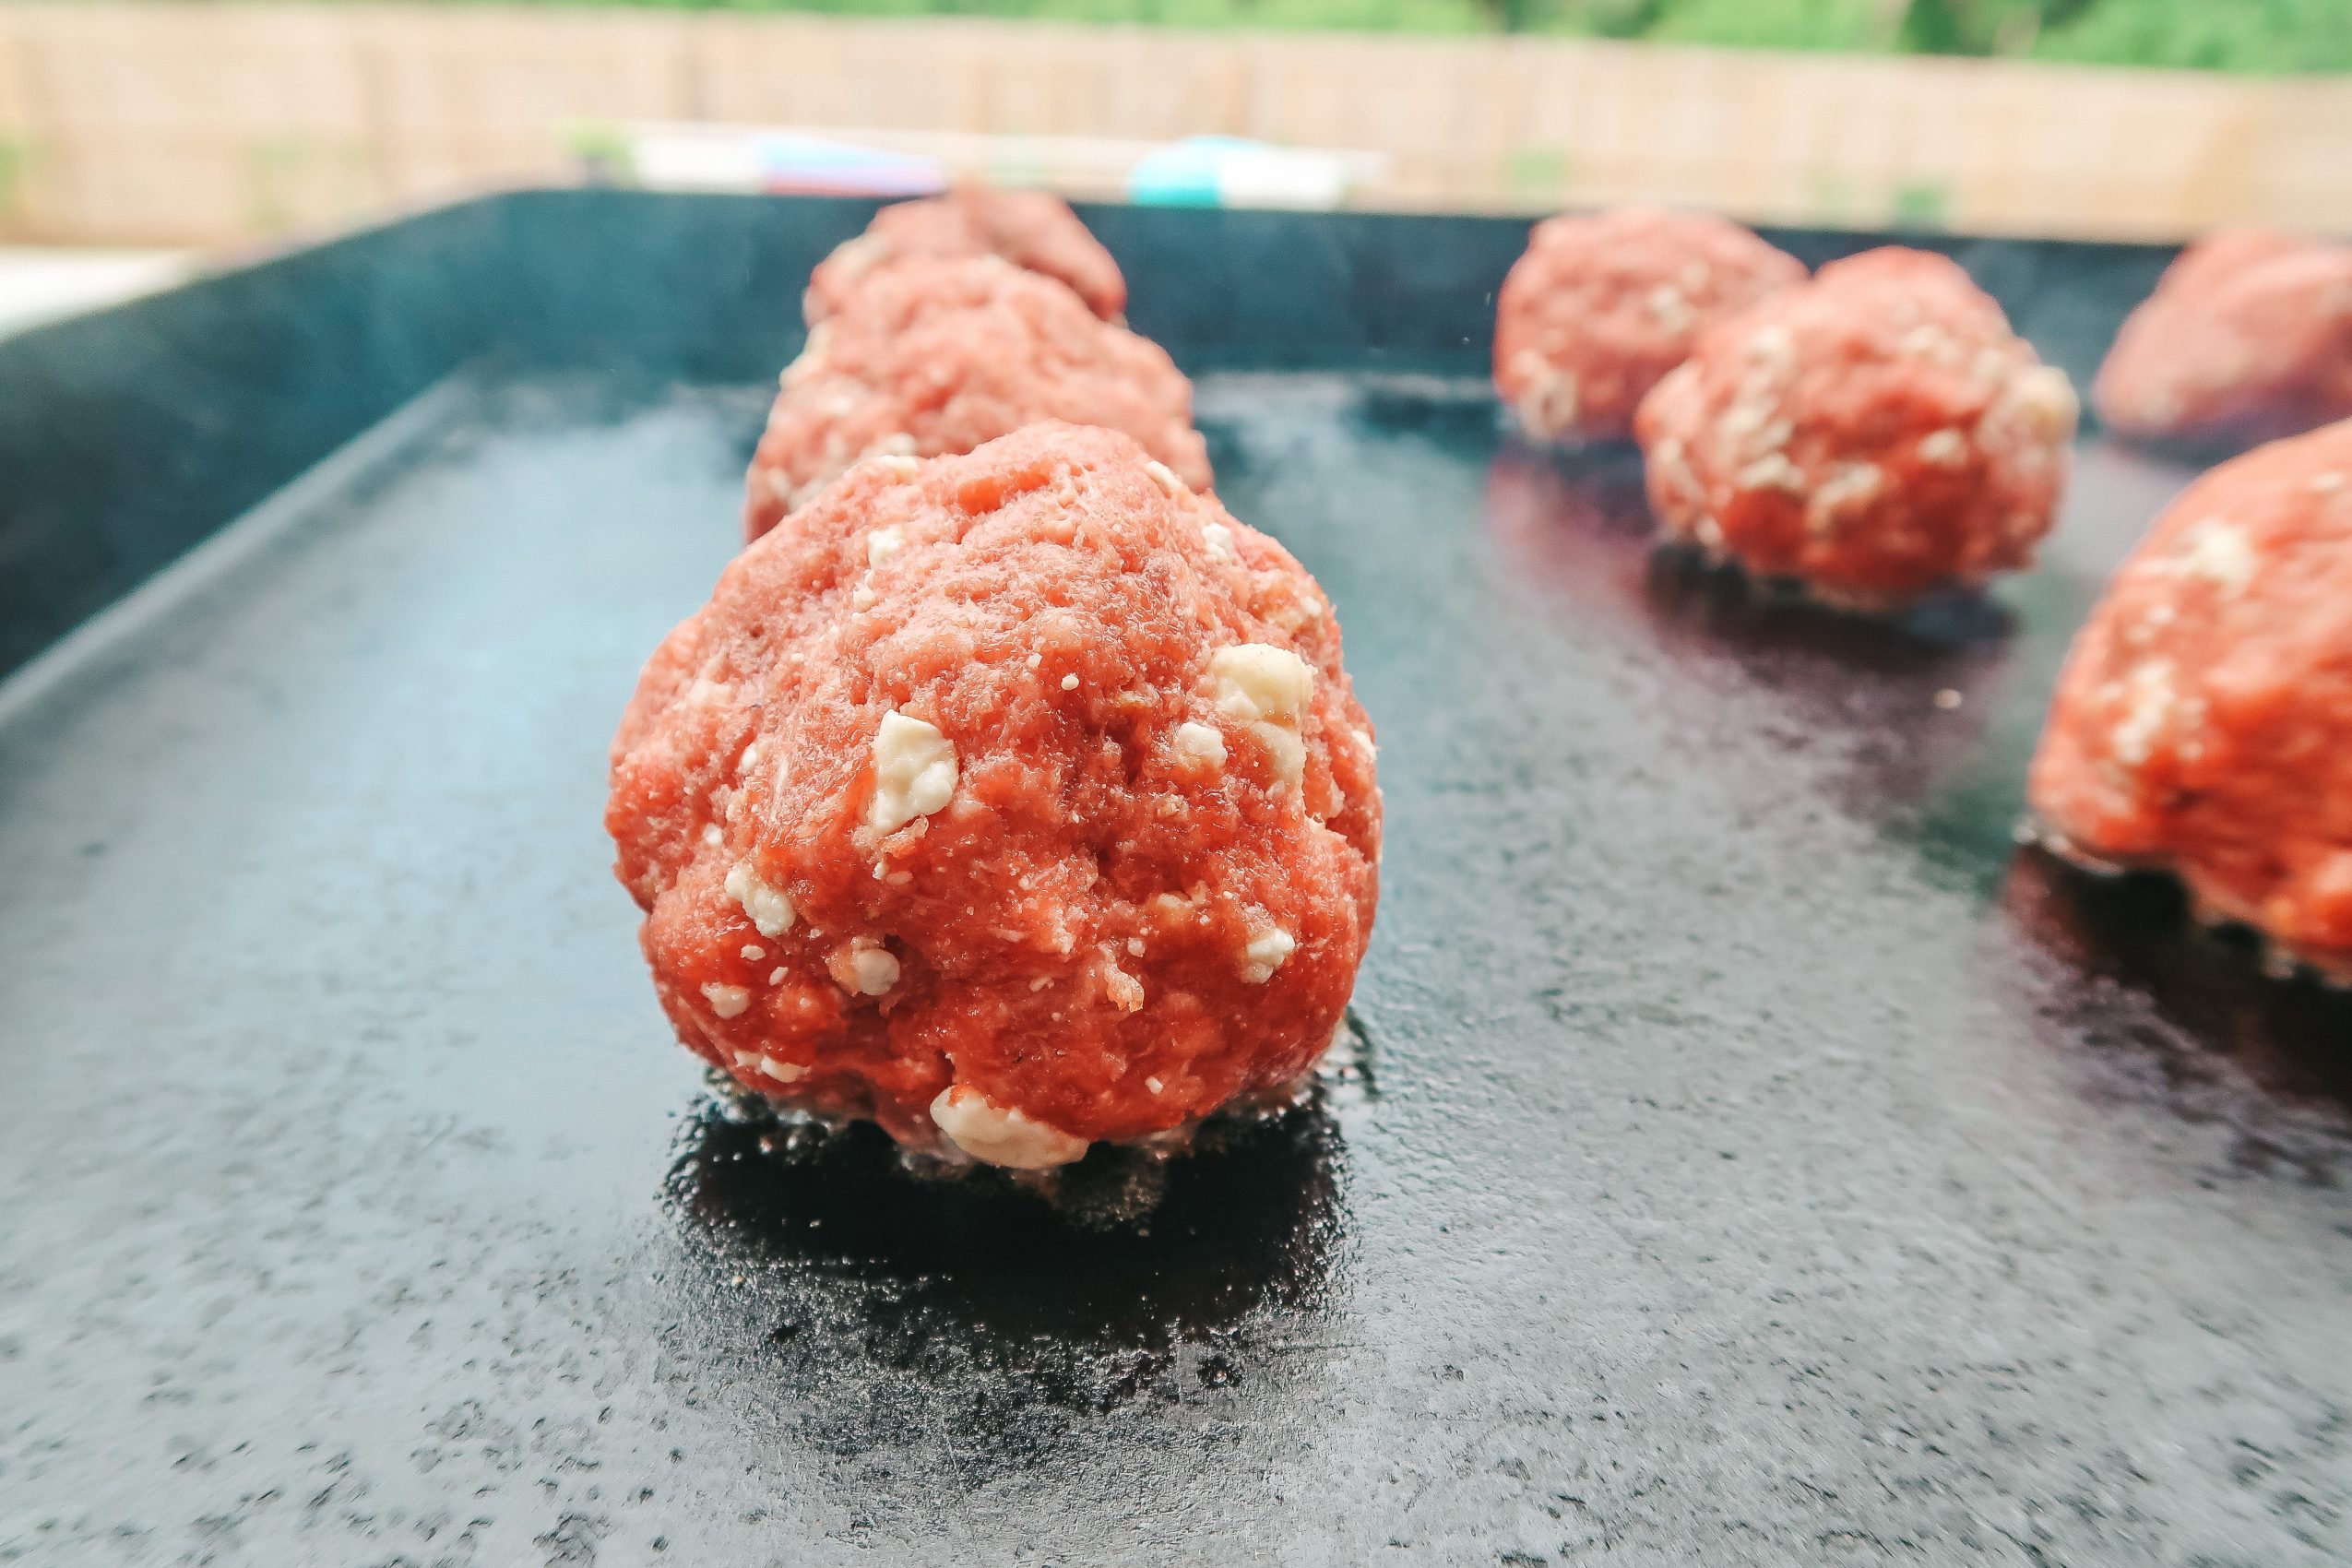 place burger balls on a grill